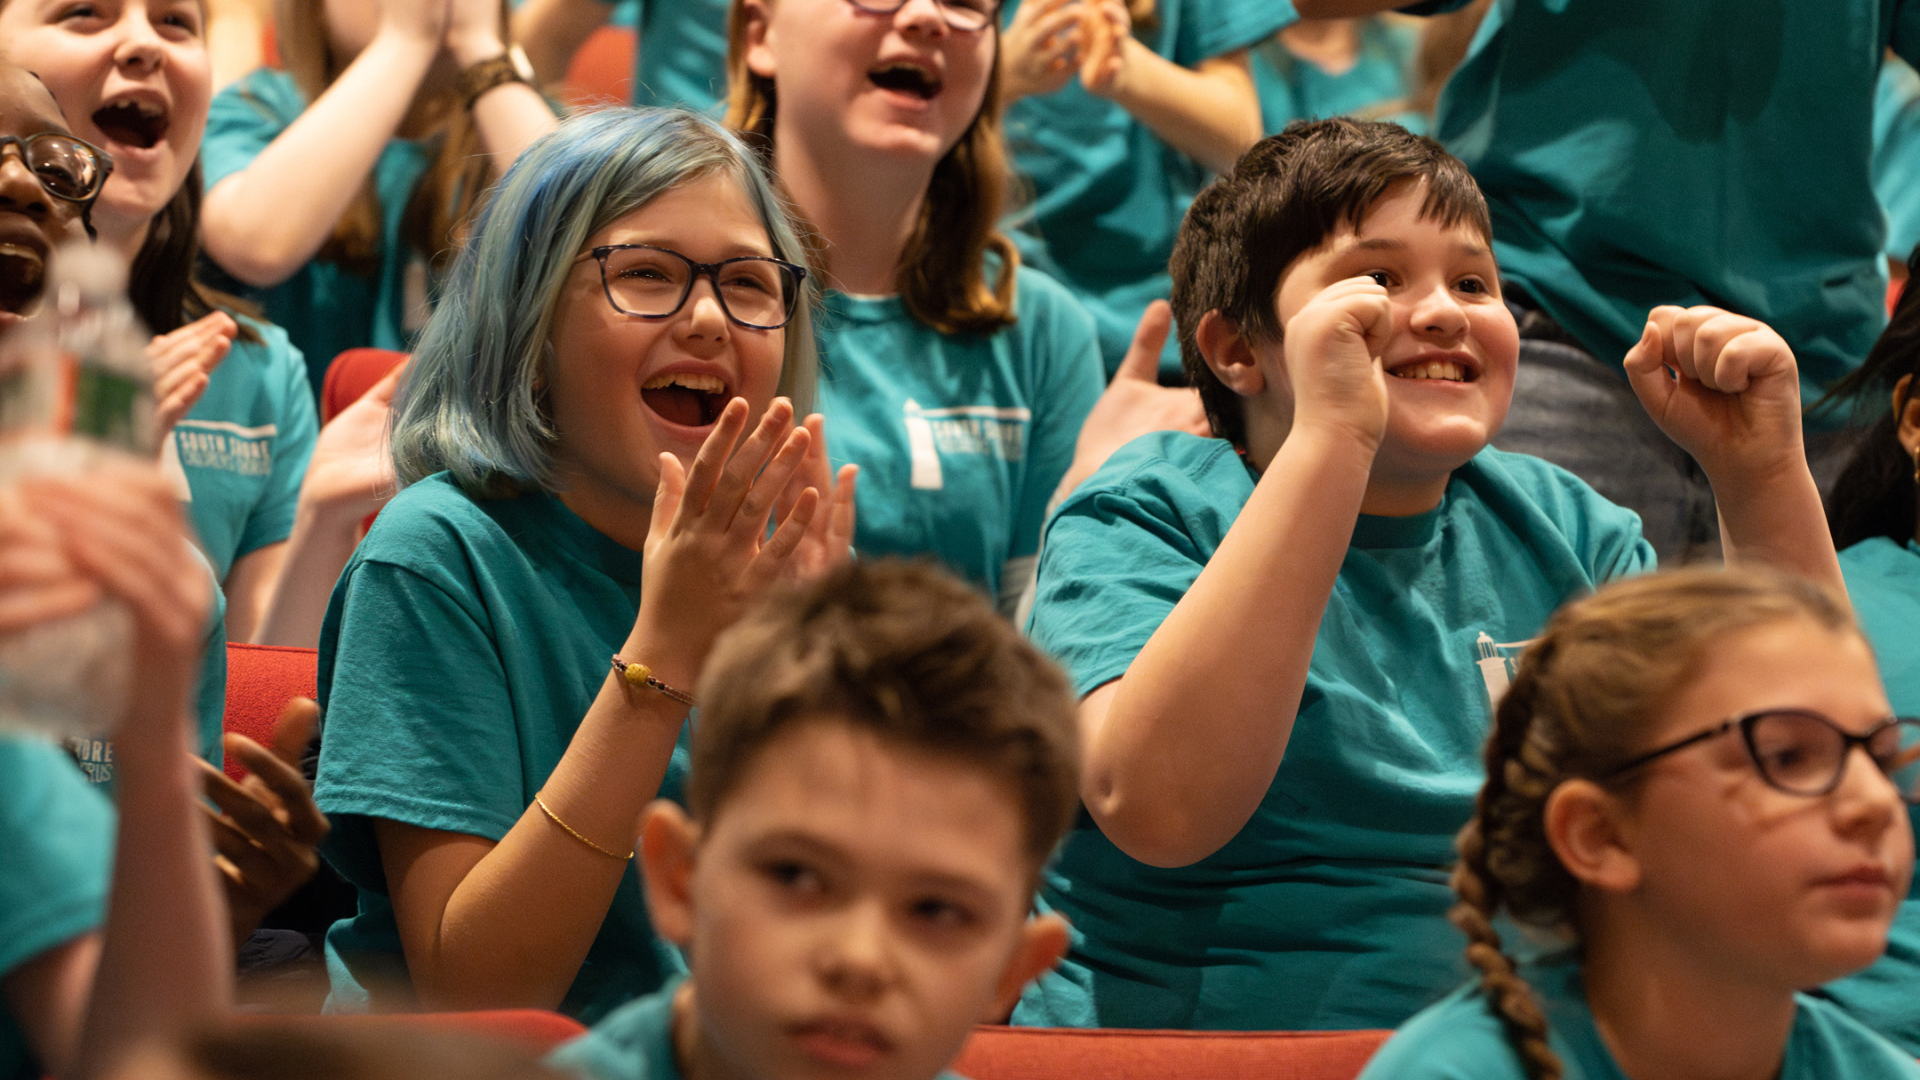 A group of youth wearing matching green T-shirts laugh, smile and cheer as they sit in an audience